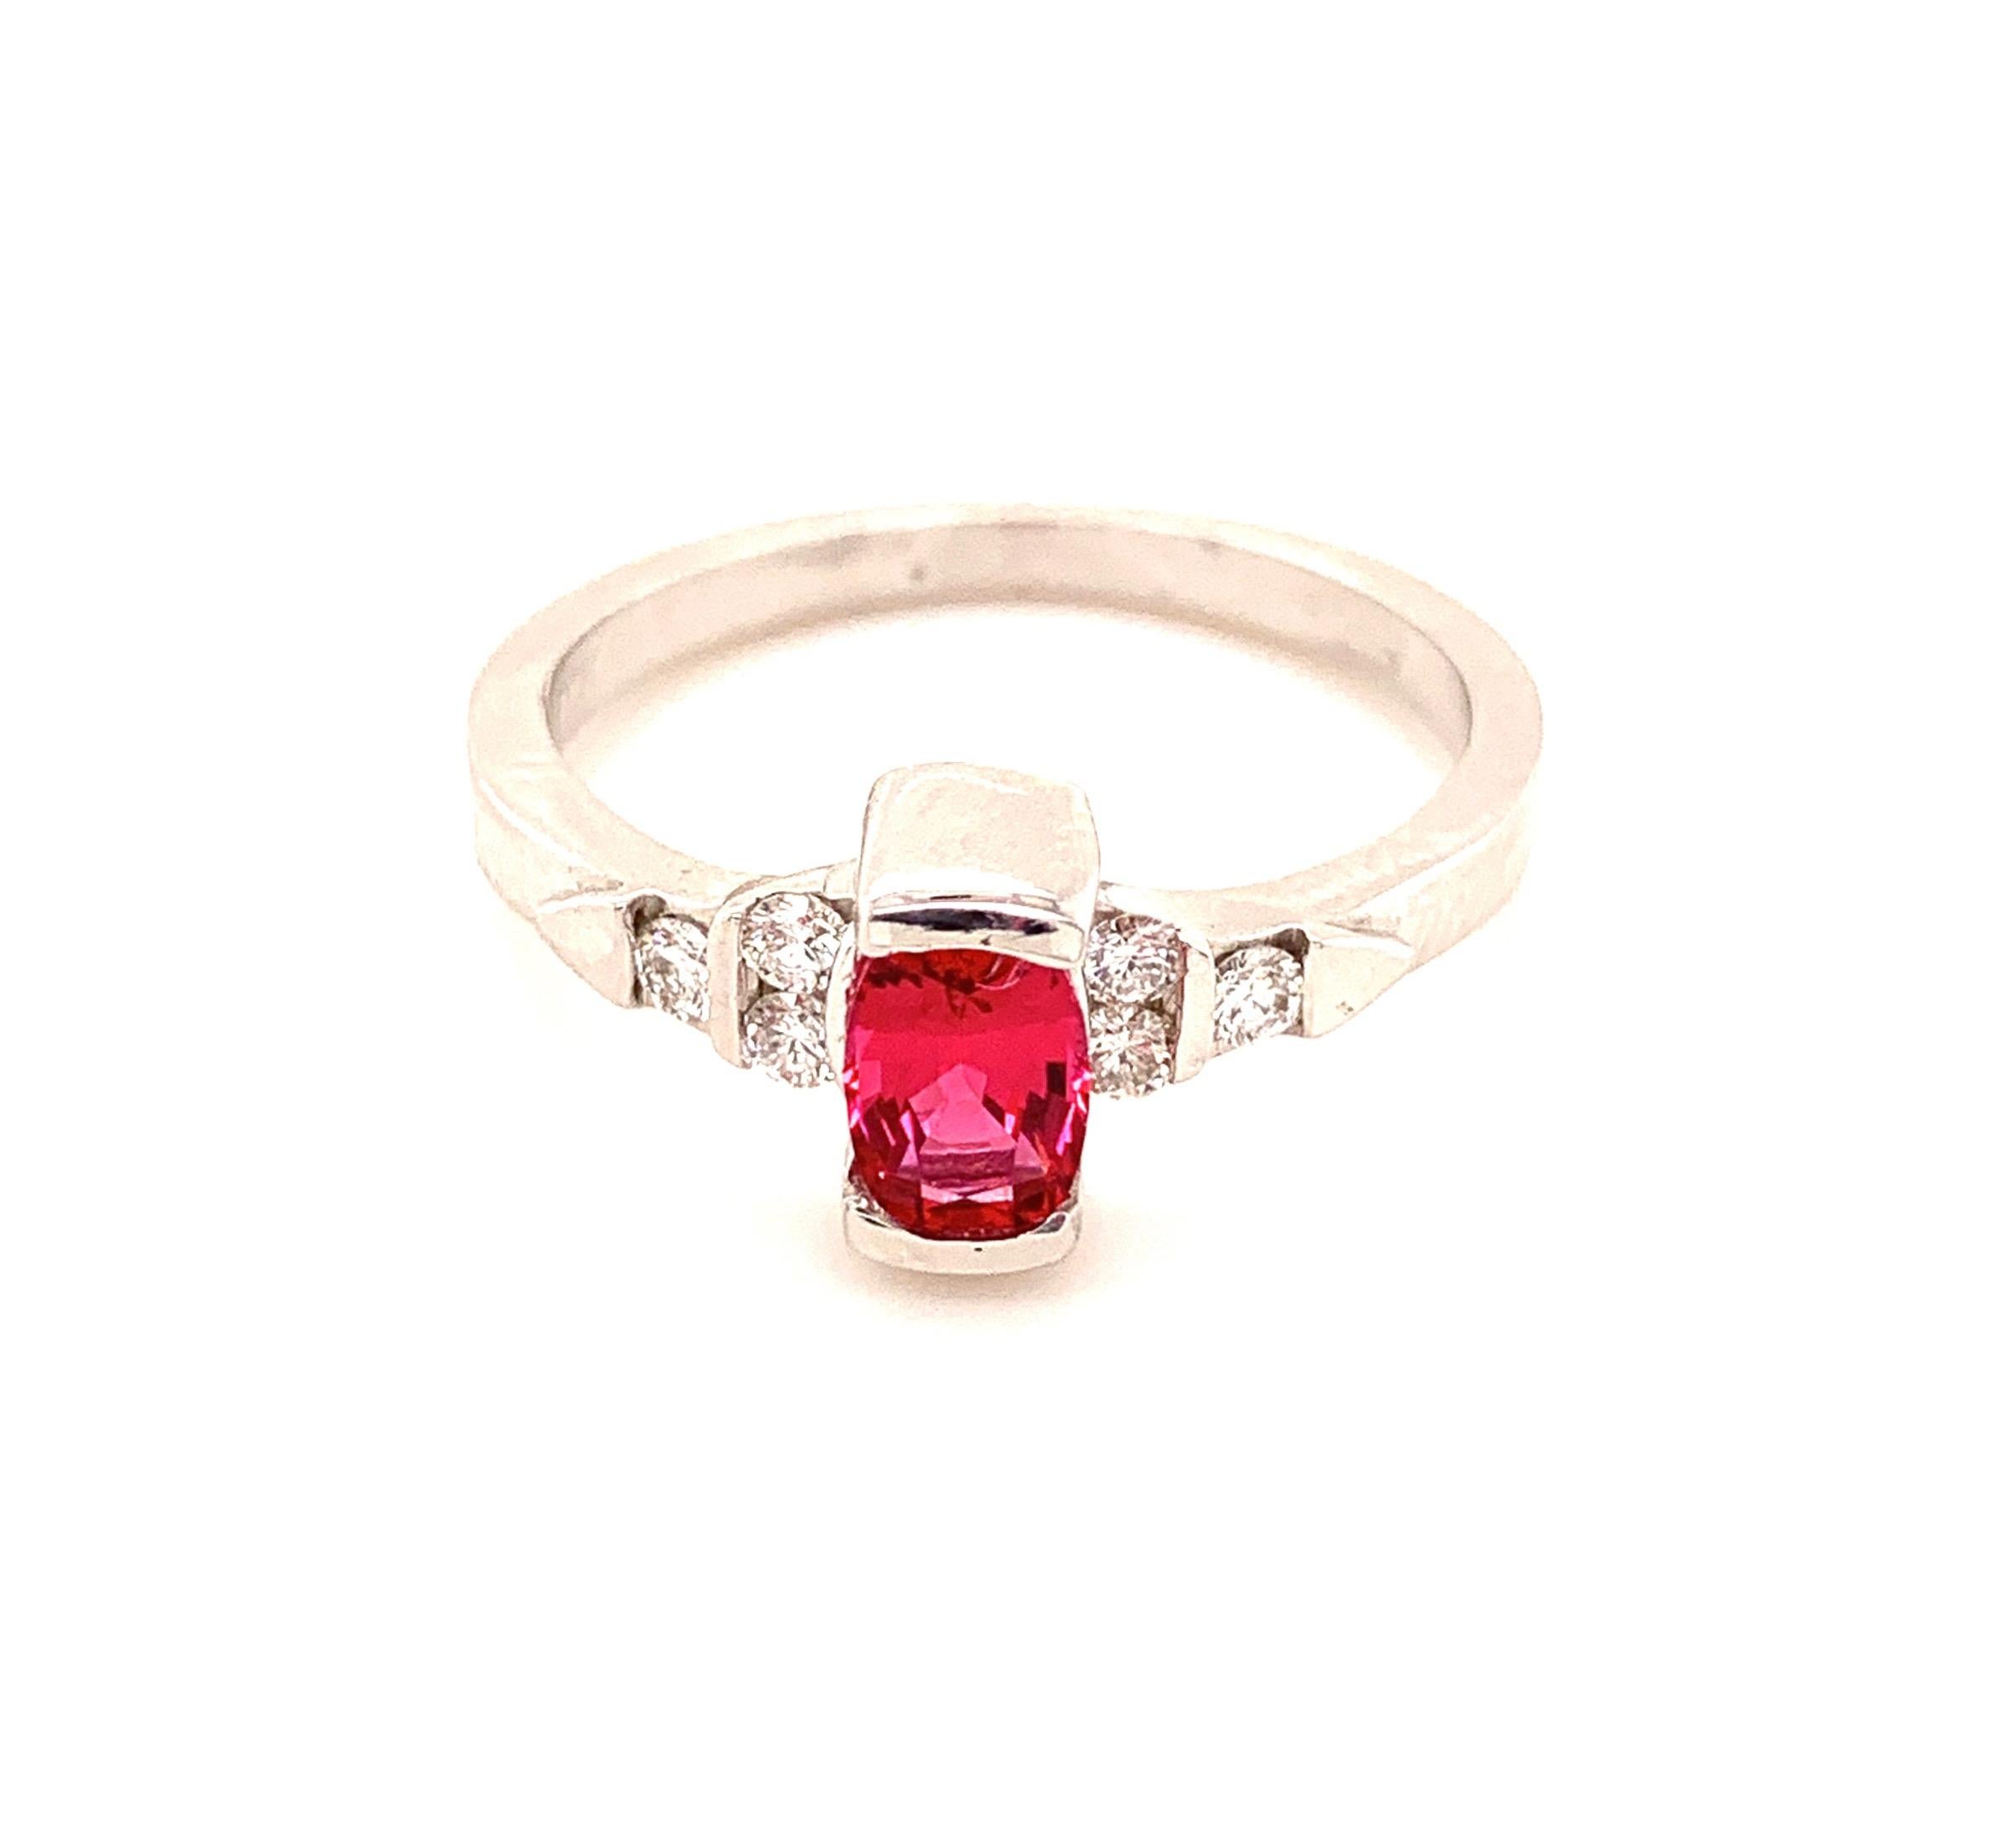 A few years ago it was easy to find some beautiful red Spinels from Burma. In the last 3 years we have a hard time  finding new material in this nice bright red. 
The stone in this ring, weighing only 1/2 carat, but can't get overlocked because of